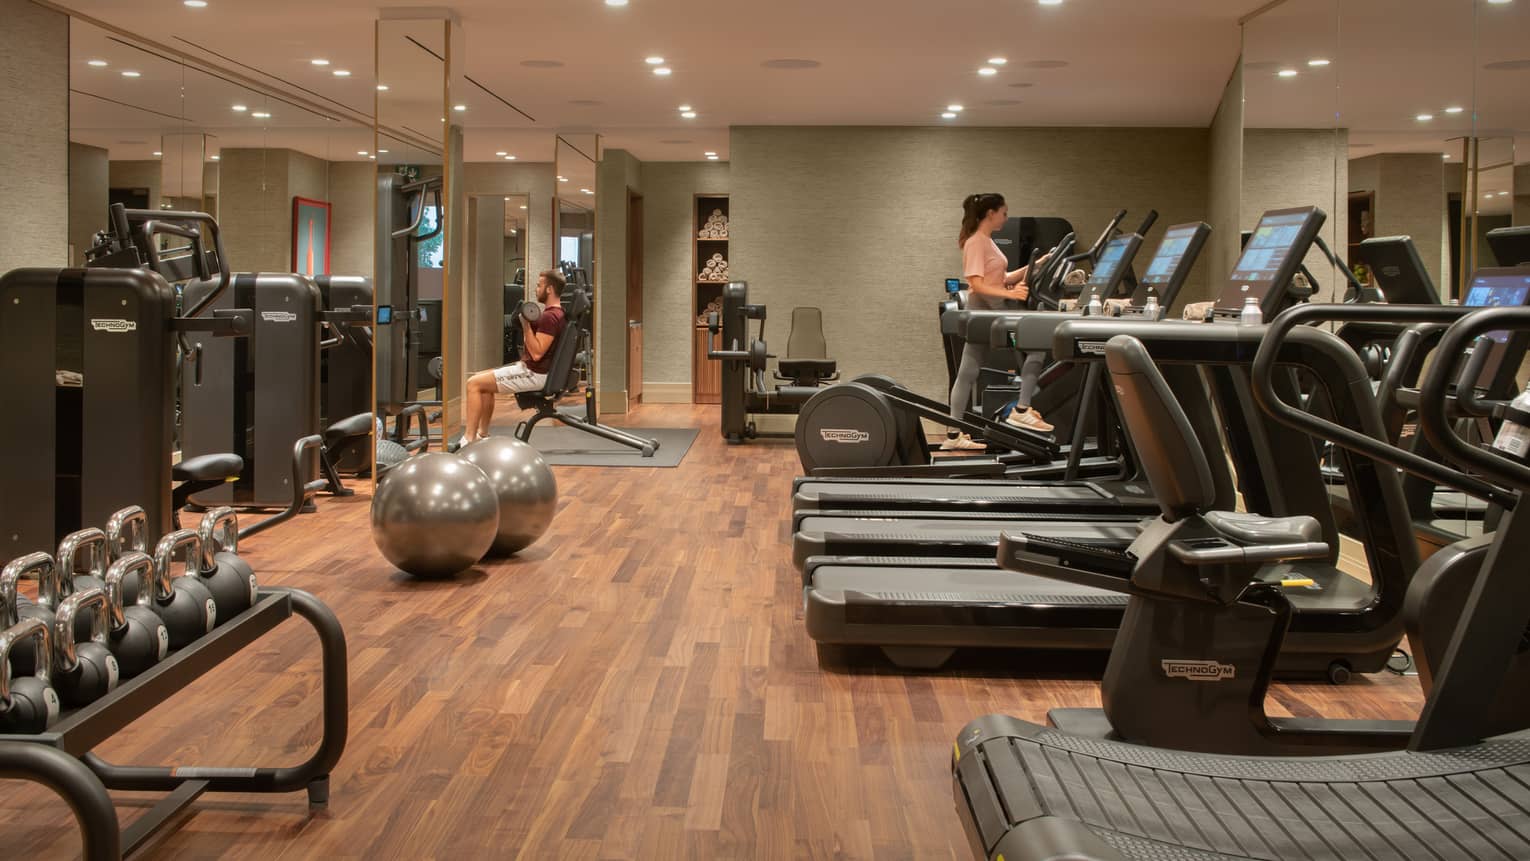 Indoor gym with a woman on the elliptical, three treadmills, free weights